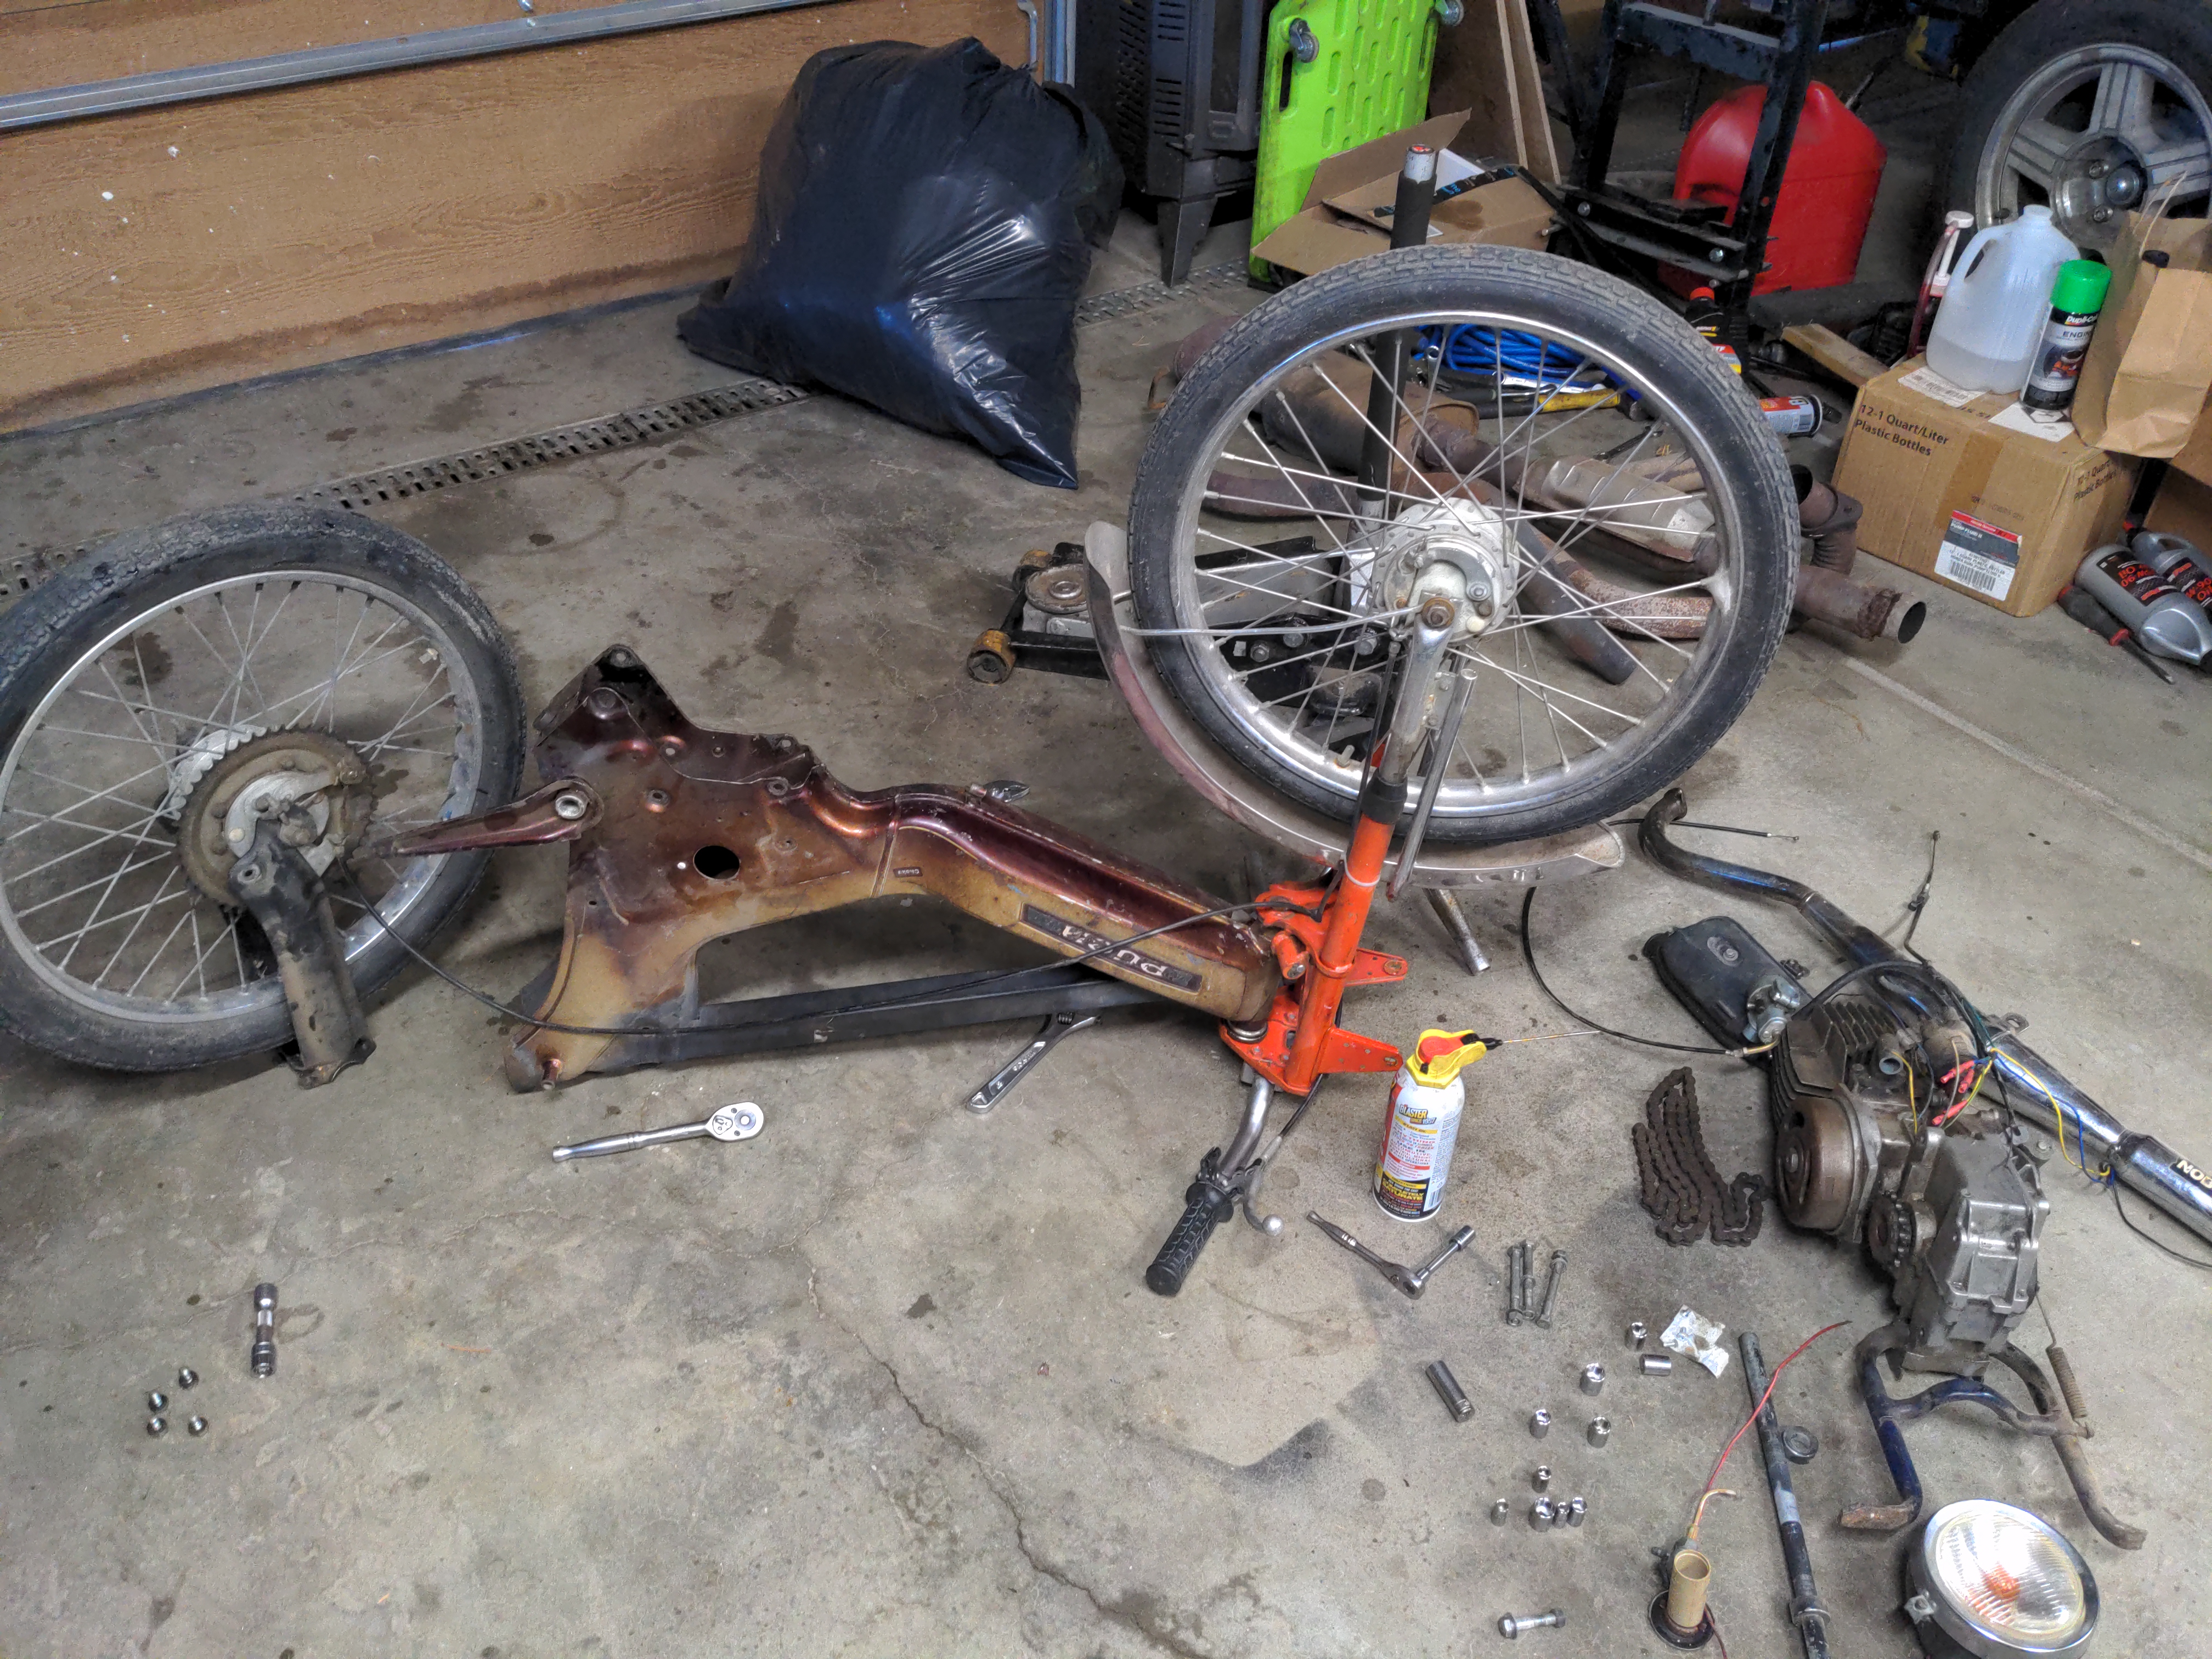 A partially disassembled Puch moped. The moped is resting upside down on a concrete floor. The front fork and wheel are still connected, but everything else has been uninstalled. The rear suspension and wheel are resting to the left of the body. To the right, a pile of discarded parts illustrates just how much weight was removed for this project.